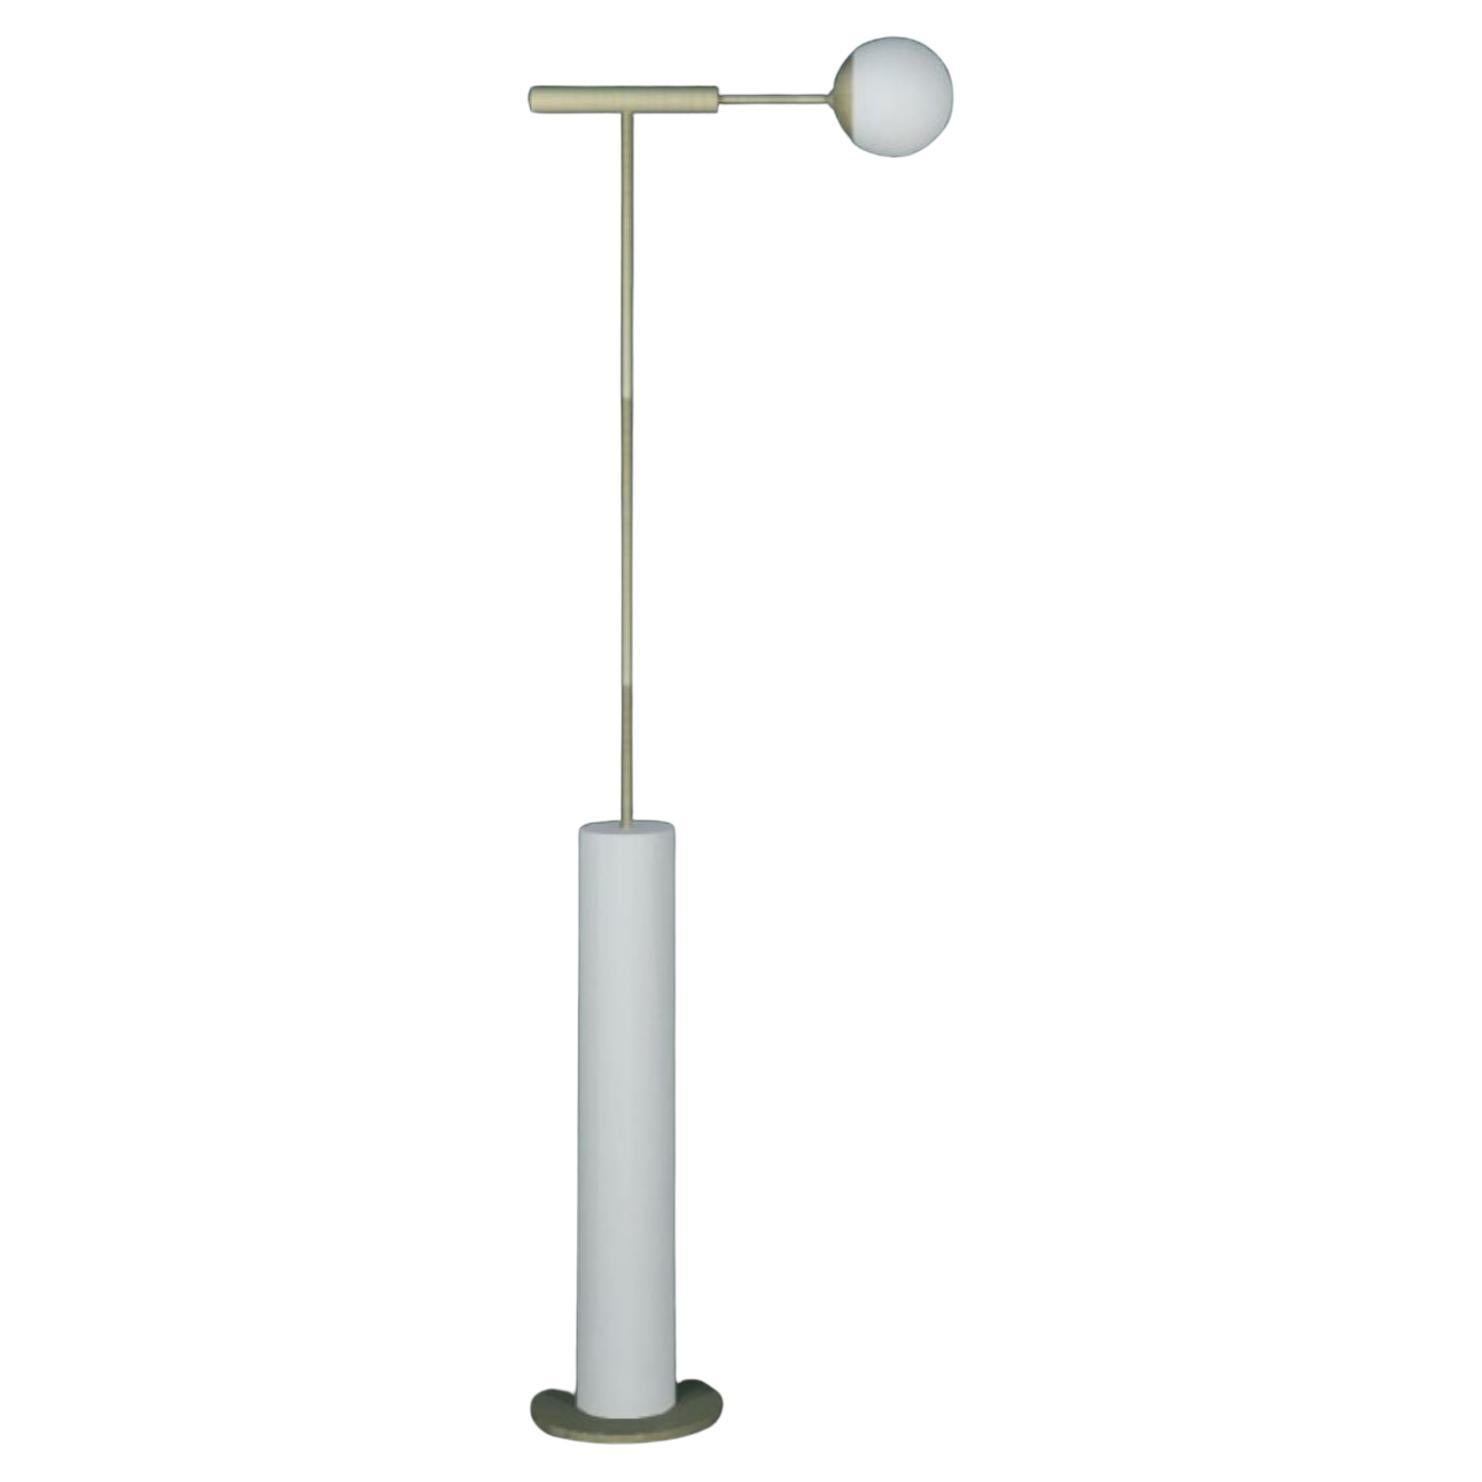 IMAGIN Geometric Floor Lamp in Brushed Brass and Frosted Glass